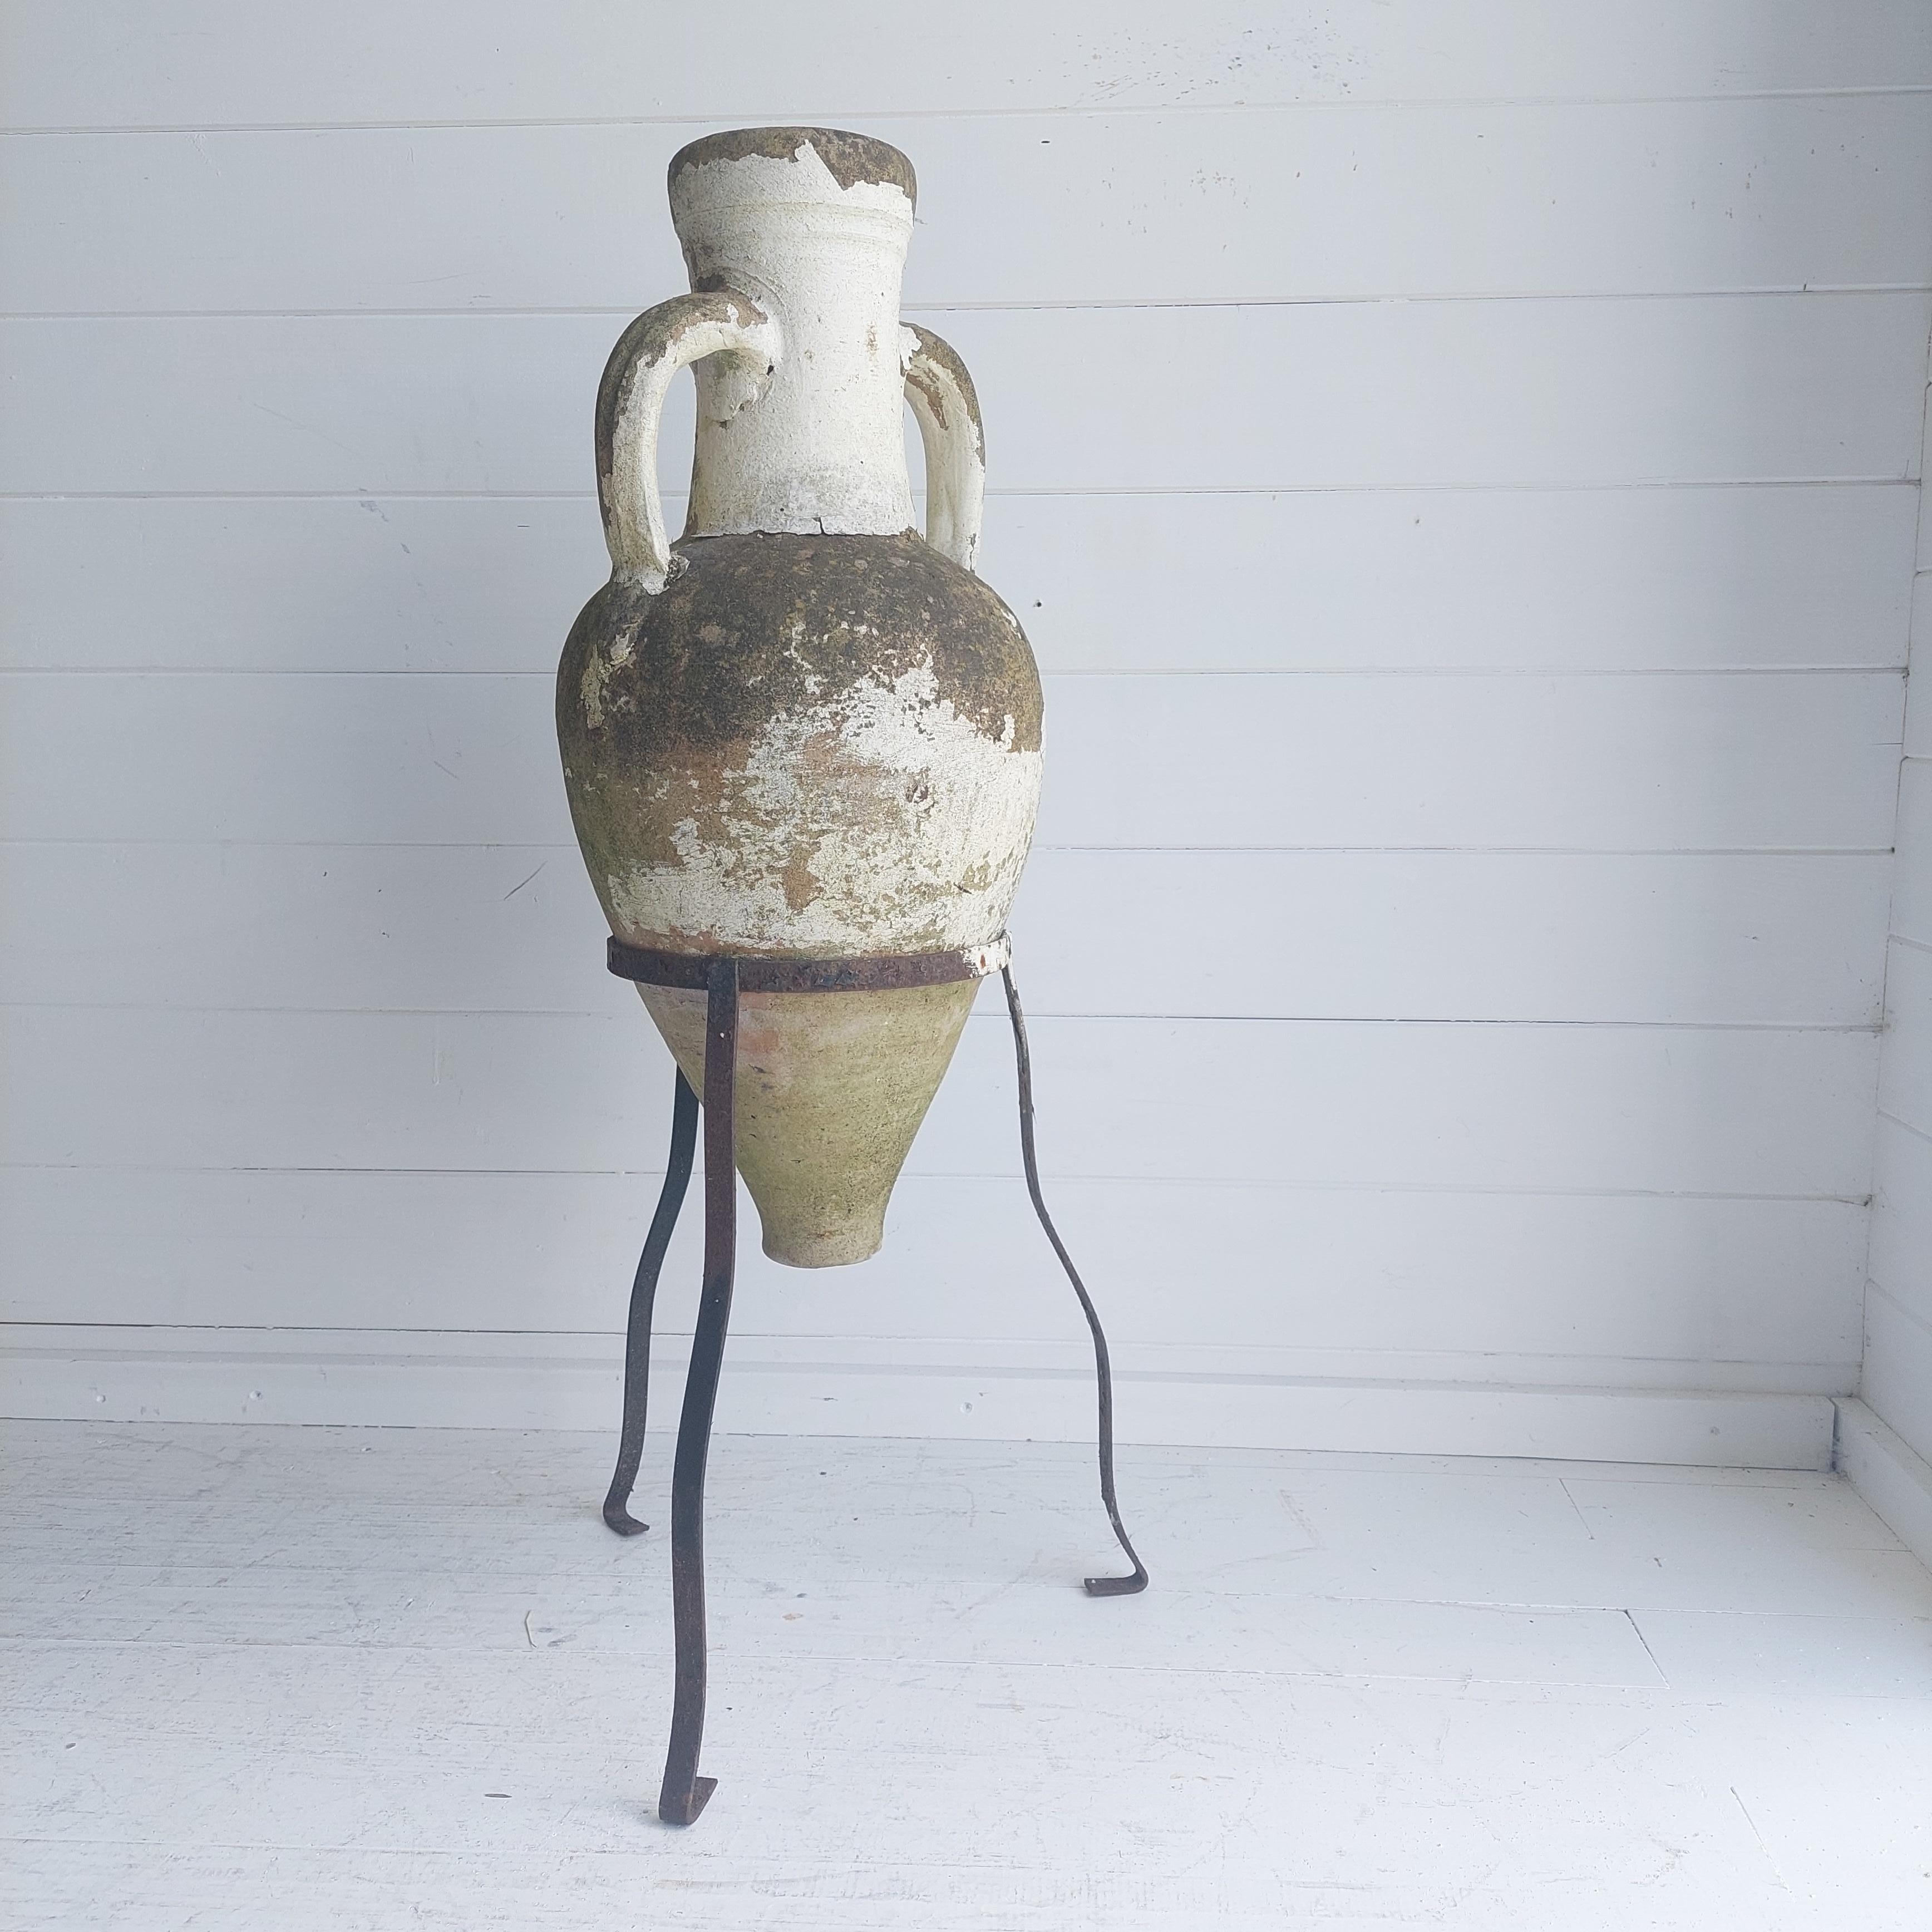 Vintage Antique Terracotta Amphora with Wrought Iron Tripod Stand, 1800s 5